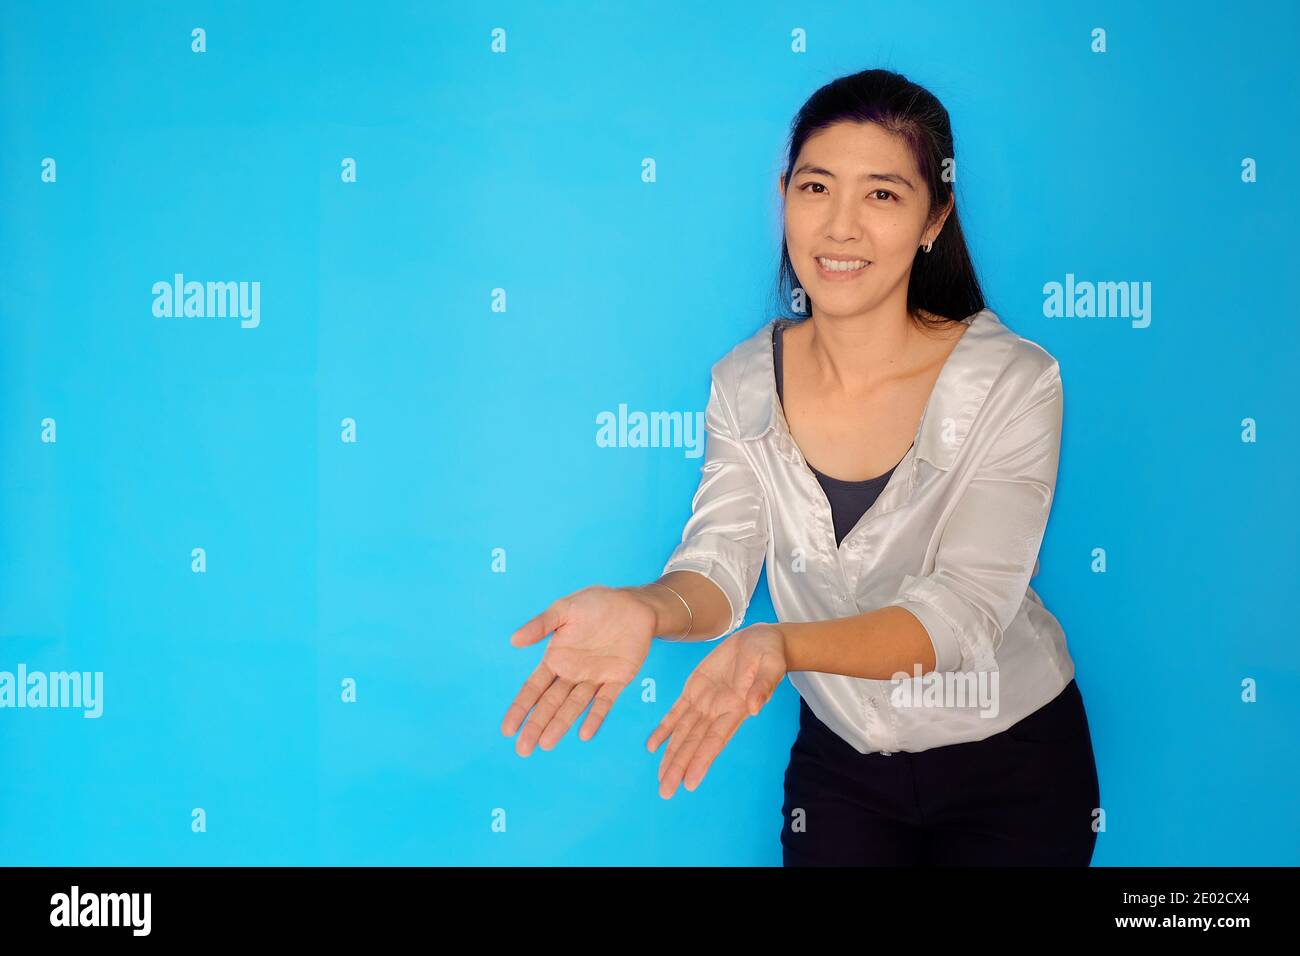 A waist height shot of an attractive Asian woman in her 30s presenting a product, pointing with open hands on a light blue plain background. Stock Photo